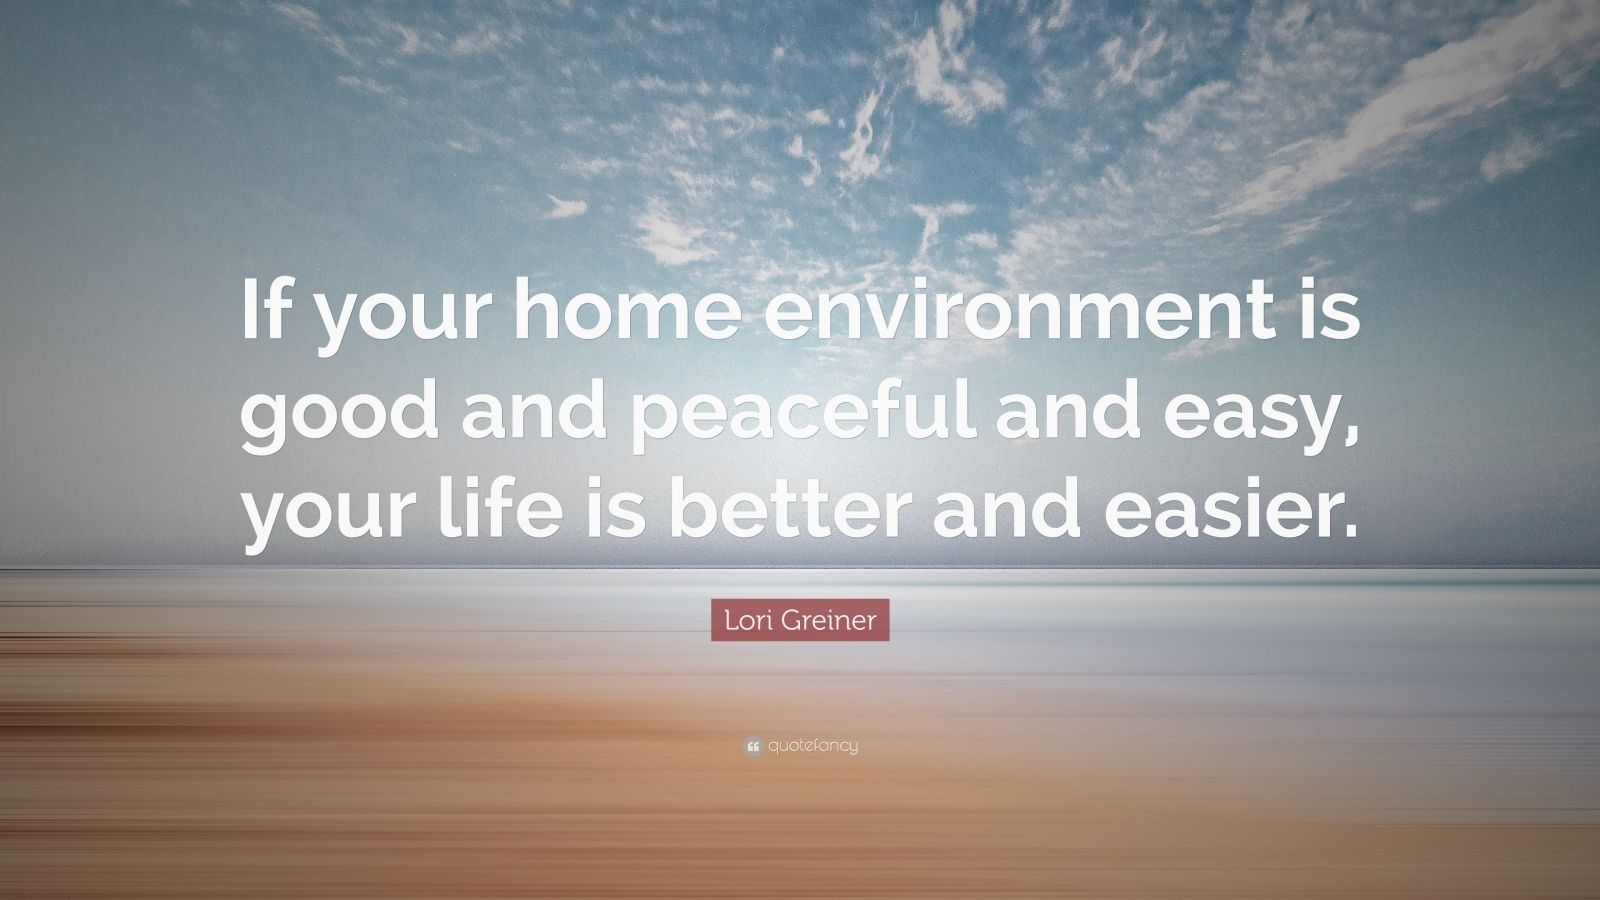 Lori Greiner Quote: “If your home environment is good and peaceful and